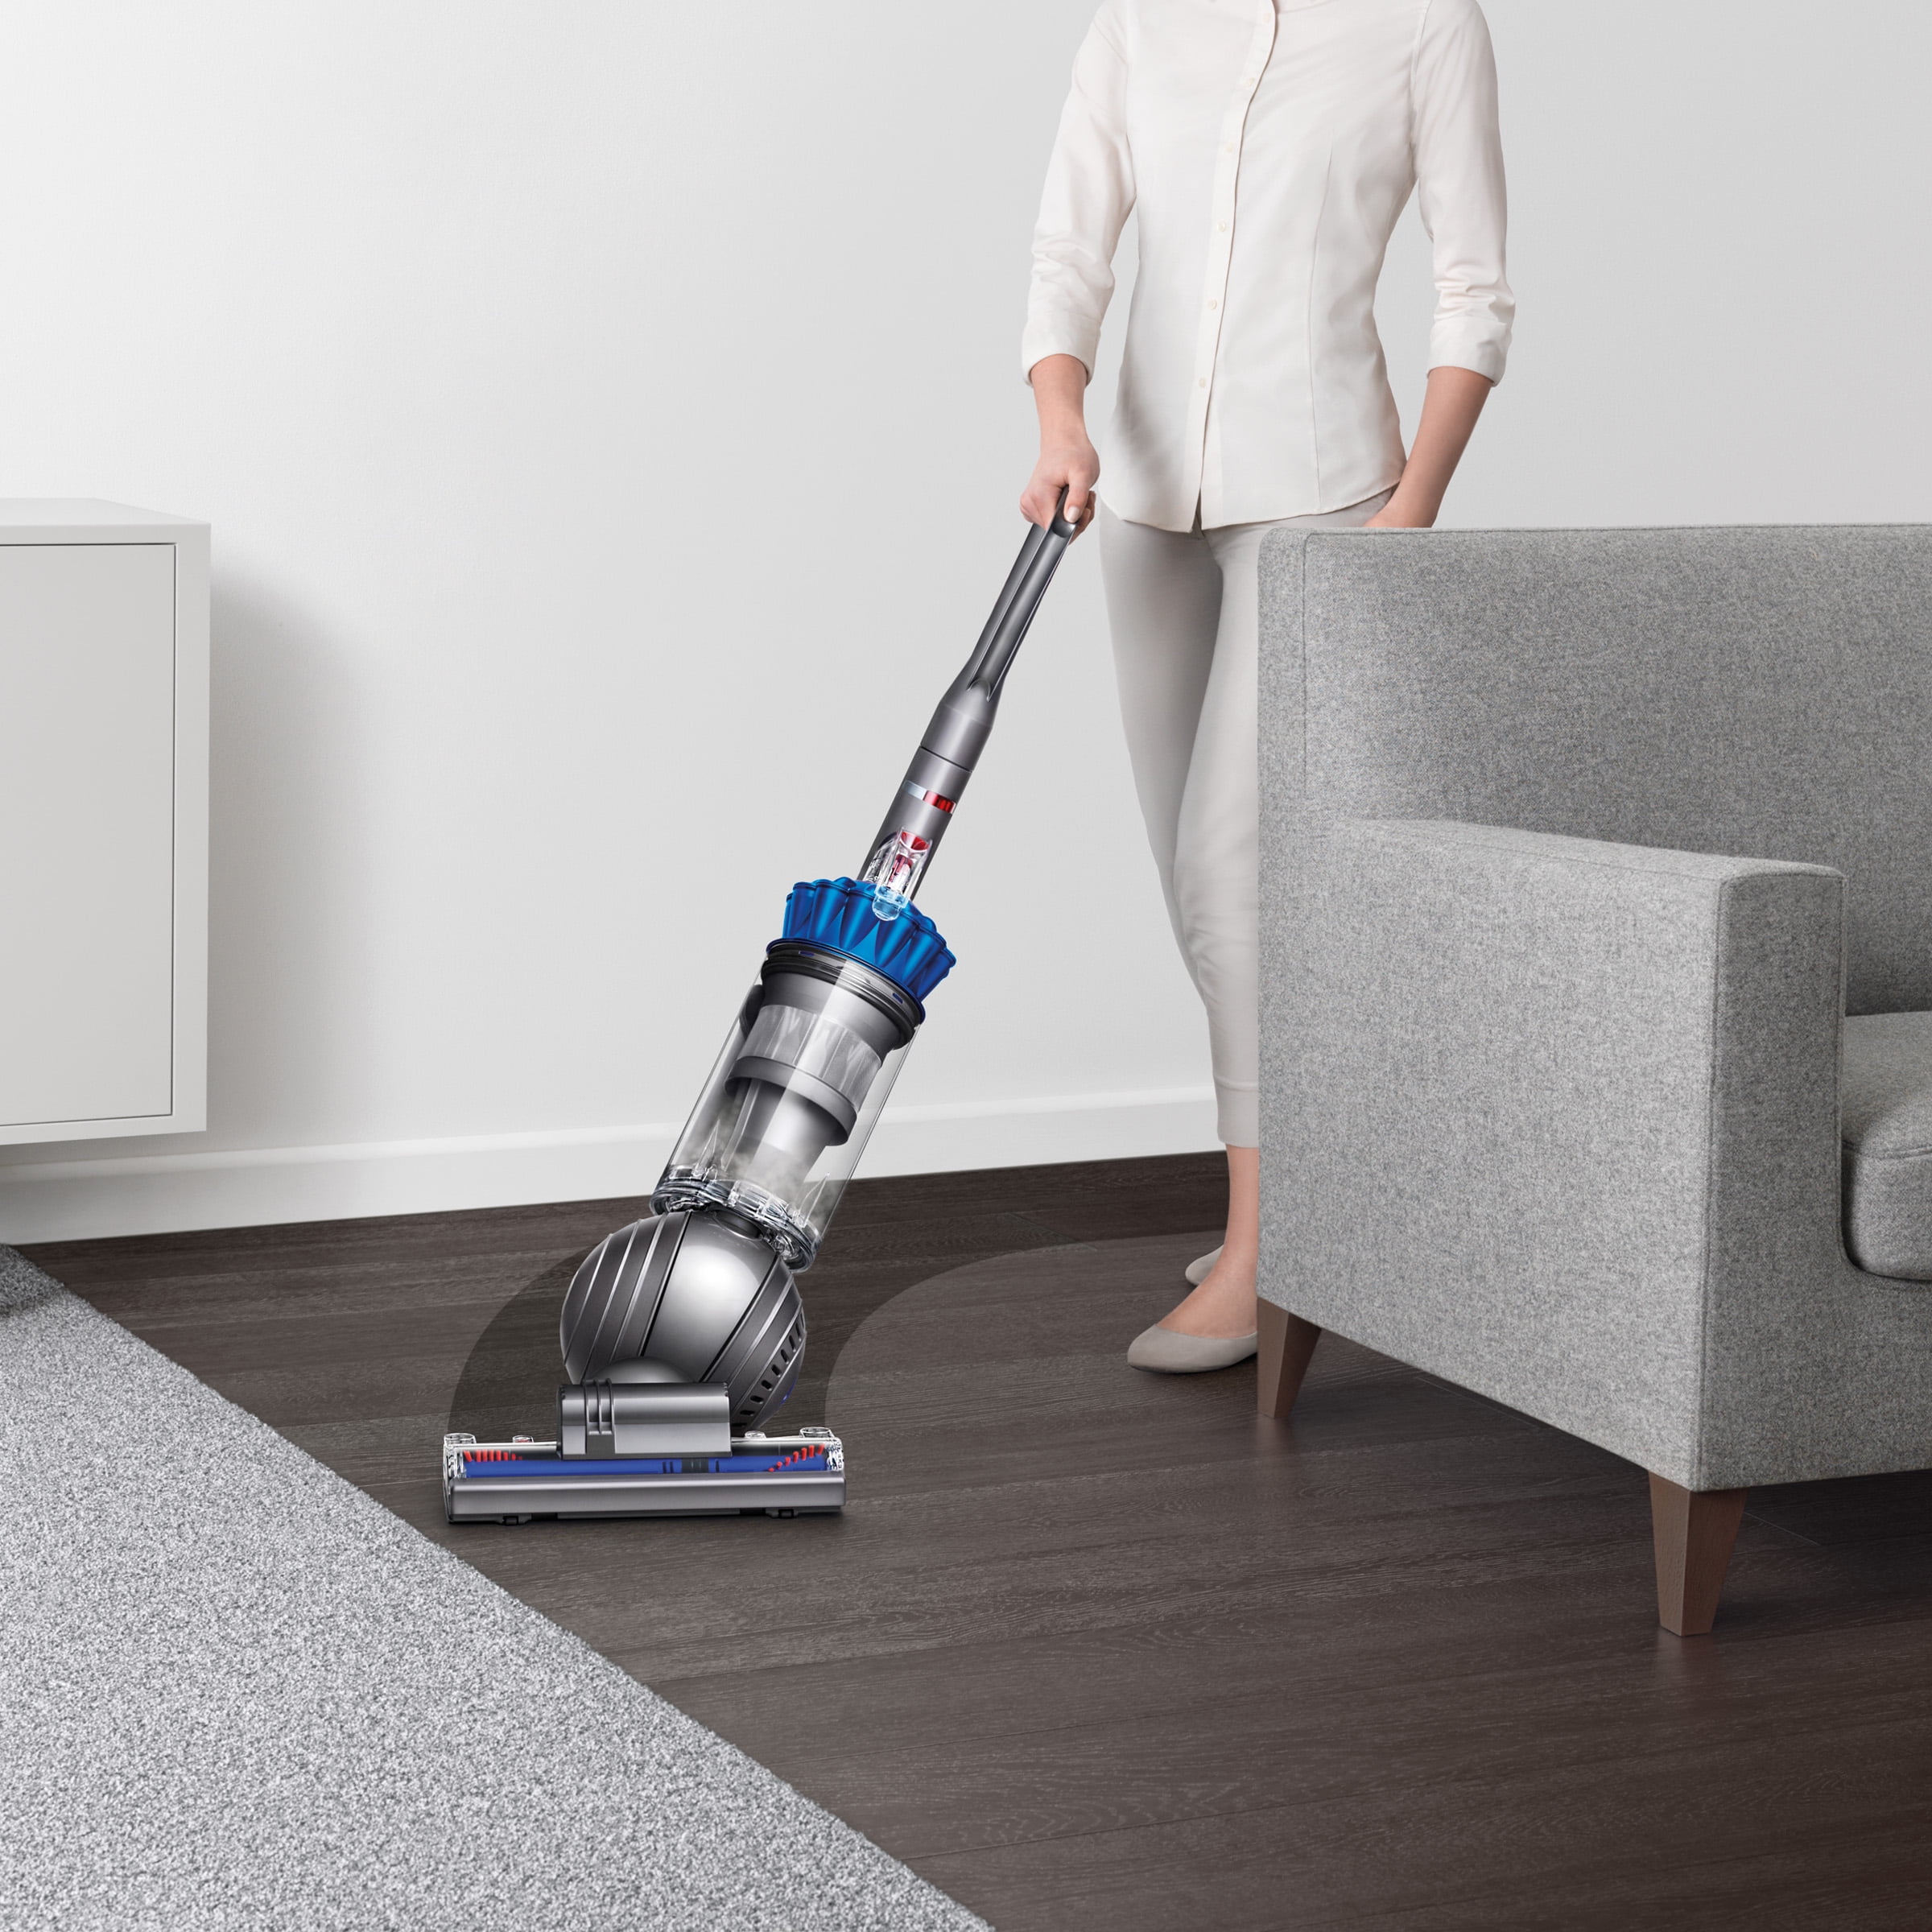 Total cleaning. Dyson Vacuum Cleaners. Dyson Vacuum Cleaner New. Пылесос Дайсон Болл. Пылесос Дайсон v5.